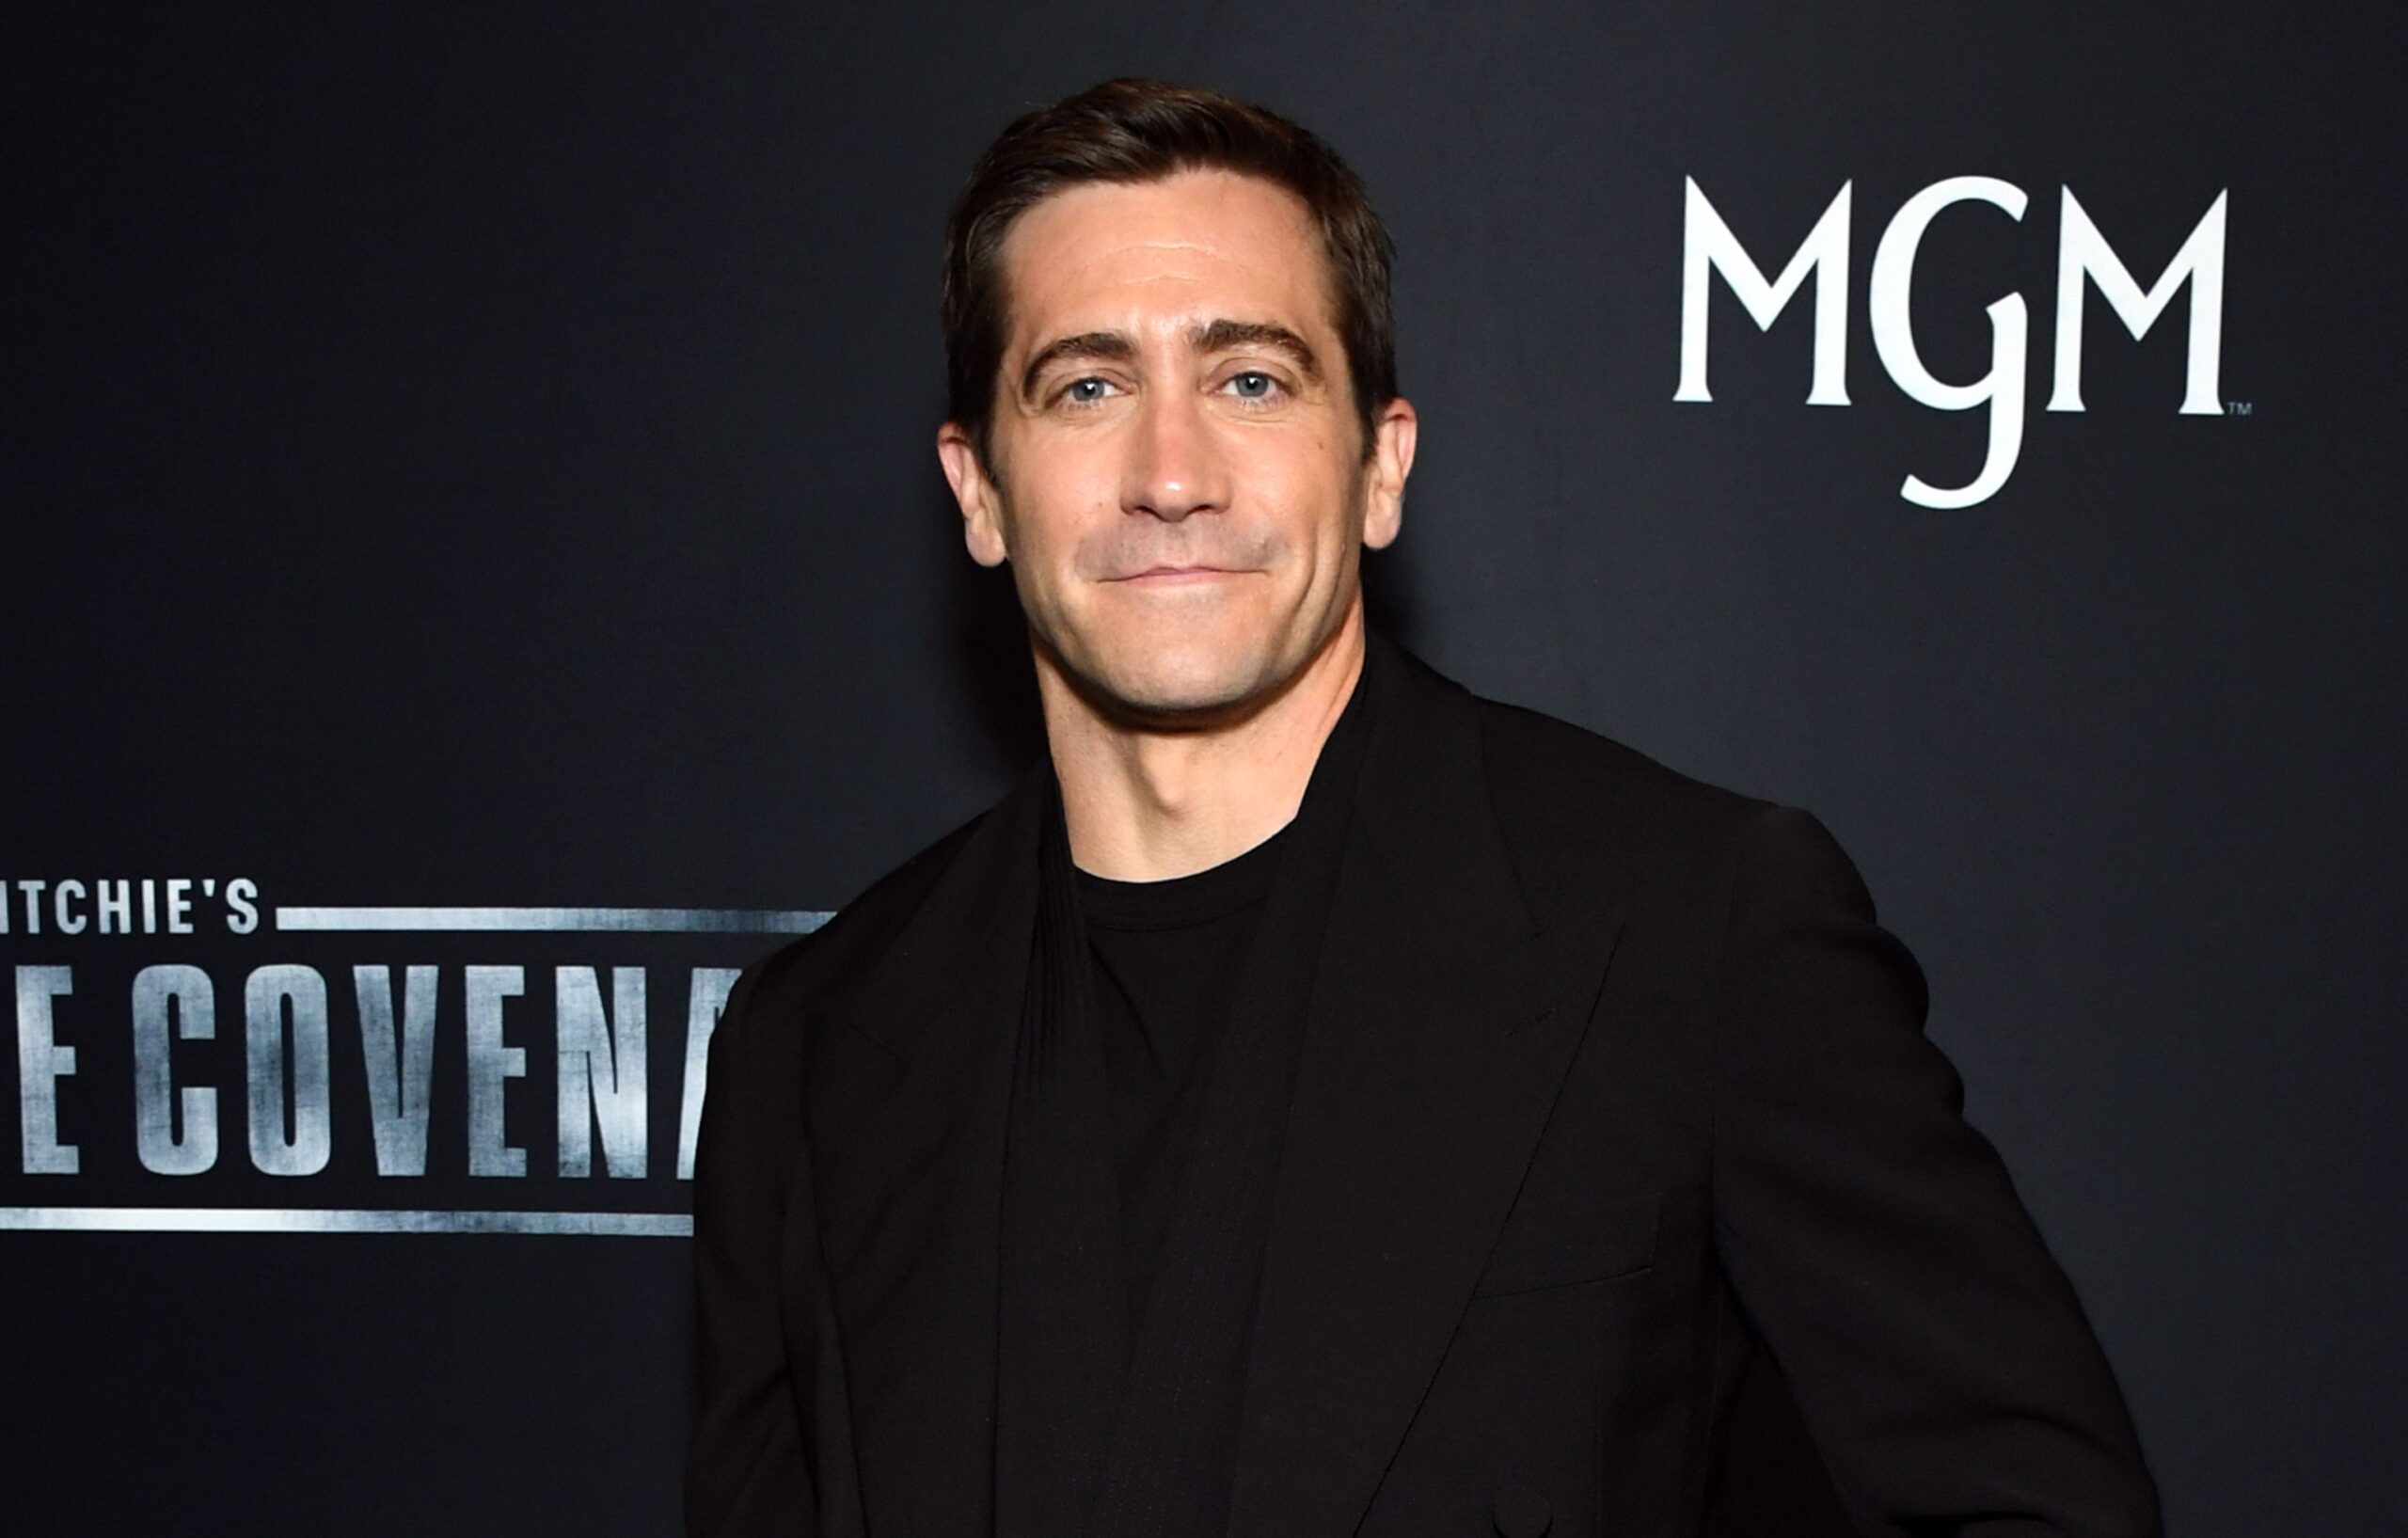 Jake Gyllenhaal On Why He’s Drawn To Military Roles Like ‘The Covenant’: ‘So Much Pride And Love’